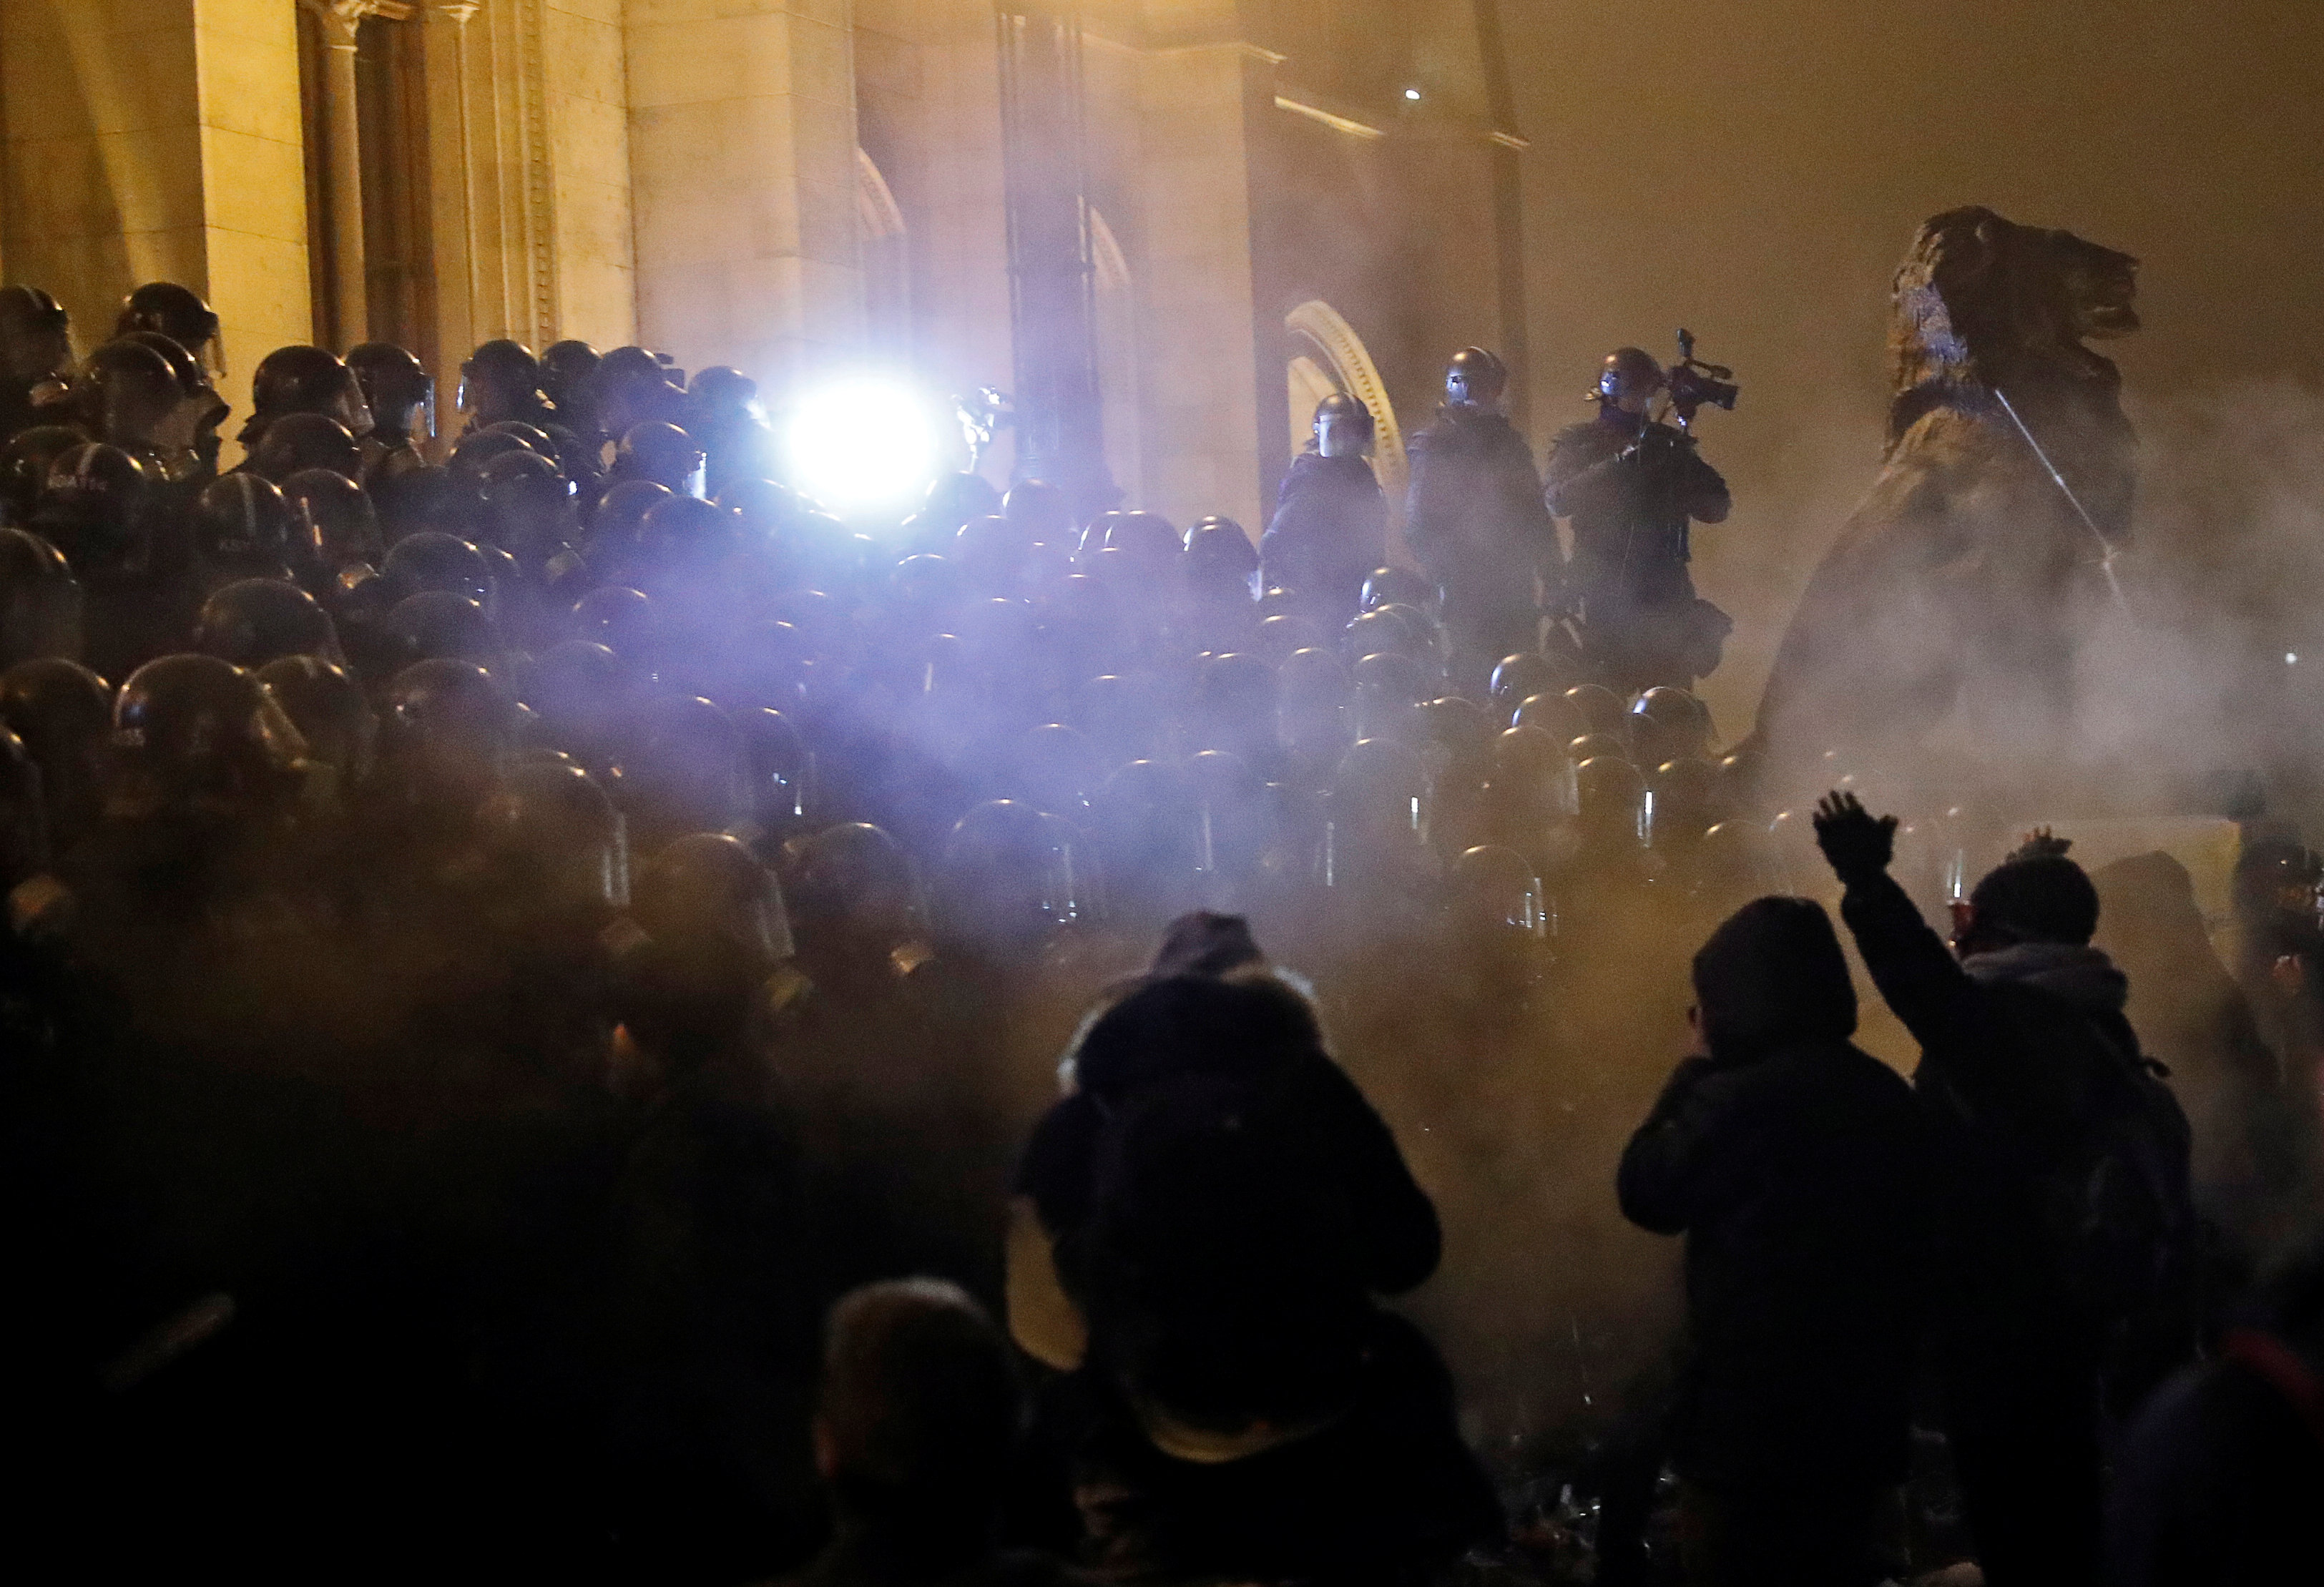 2018-12-13T222044Z_355239426_RC12F478A700_RTRMADP_3_HUNGARY-PROTESTS